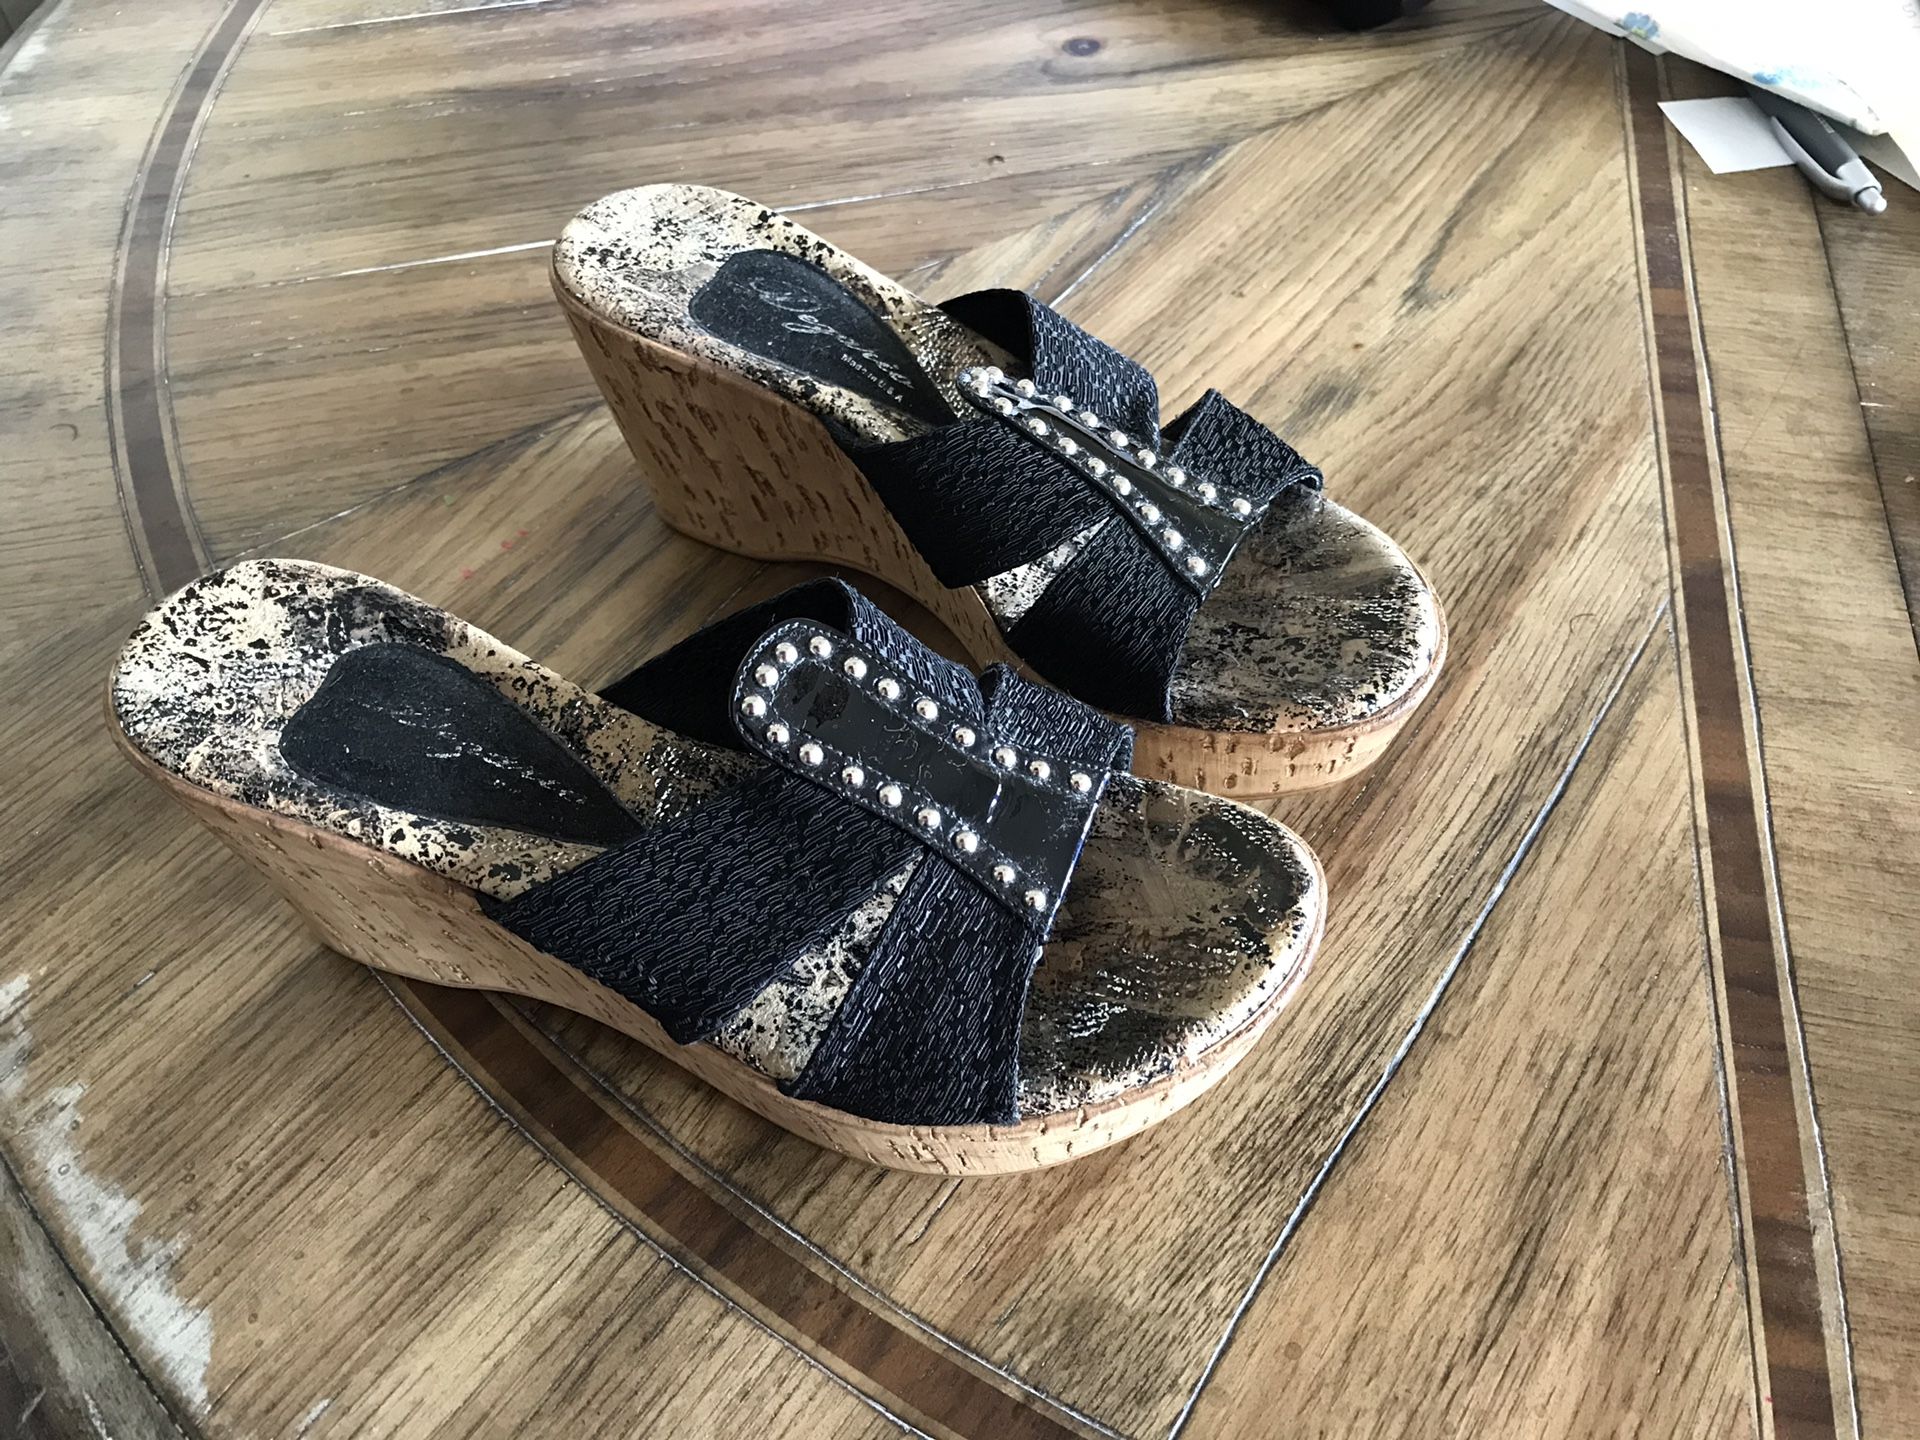 Black wedge women’s shoes. Size 36 (US size 5.5 to 6)